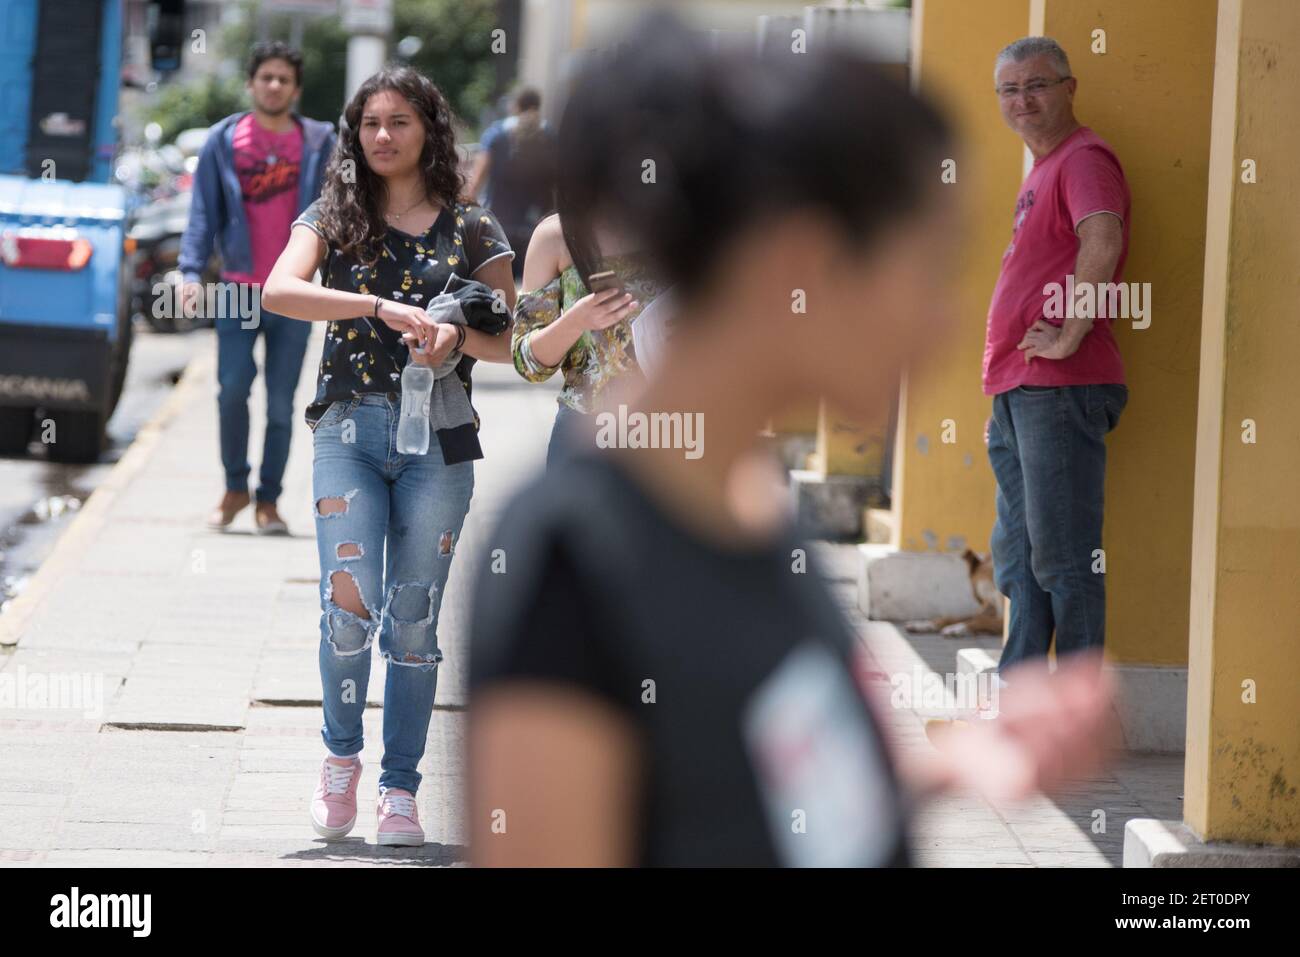 SC - Leges - 04/11/2018 - Enem 2018 Santa Catarina - Students arrive late for the Exame Nacional do Ensino Médio test in Lages, Santa Catarina this afternoon, the first day of tests. Photo: Fom Conradi / AGIF/Sipa USA Stock Photo